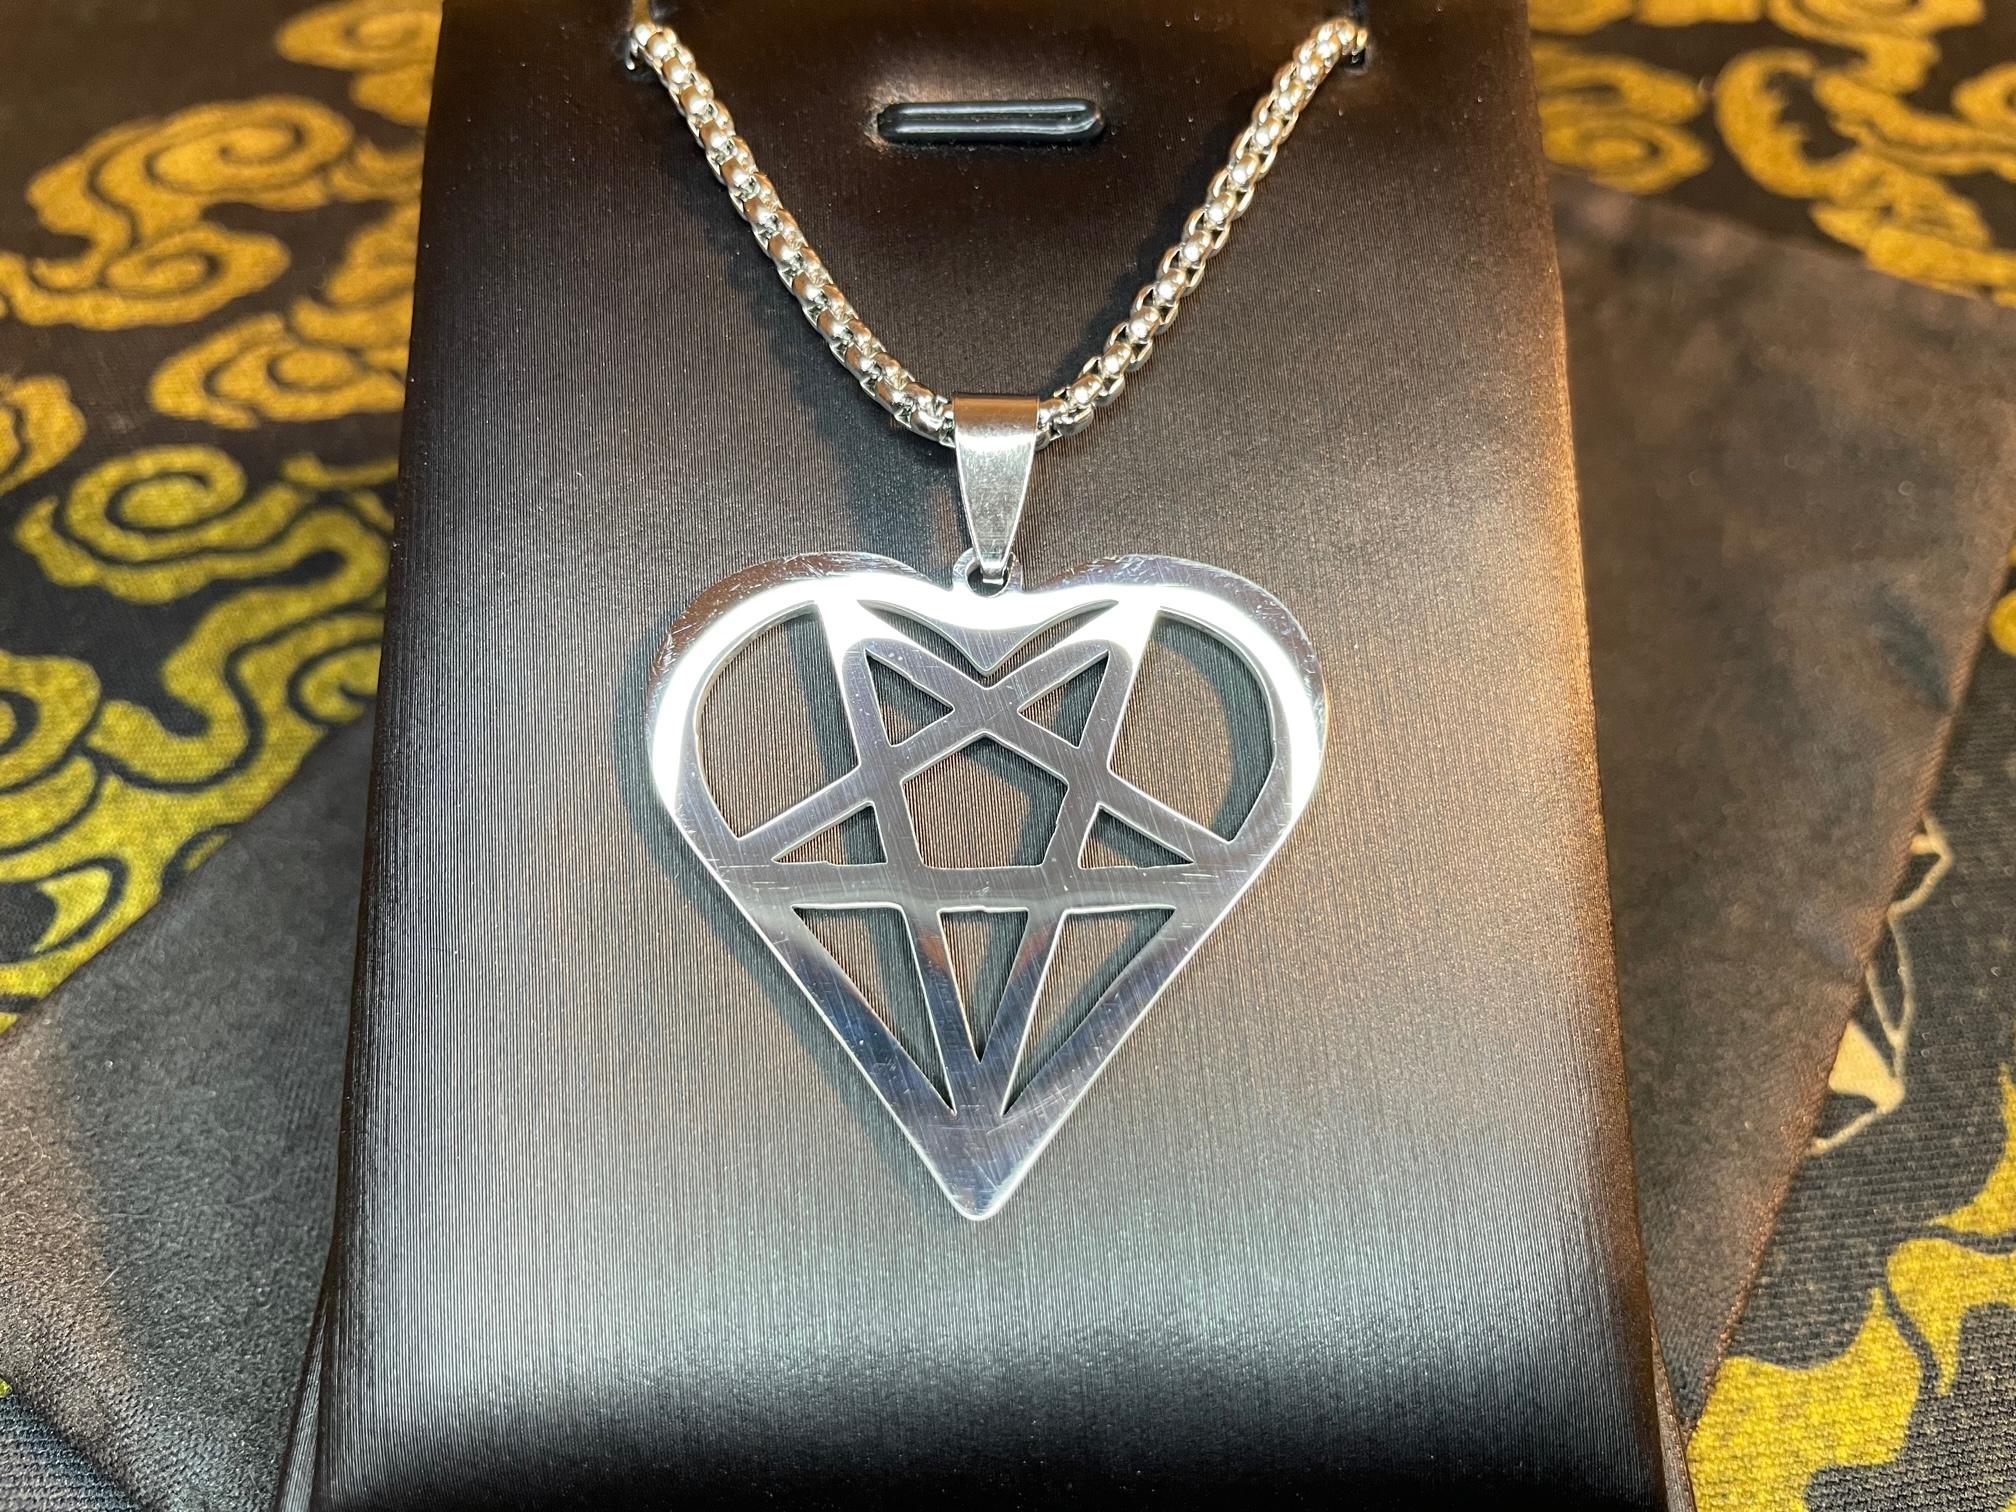 satan's heart inverted pentagram feminine masculine force duality necklace satanic wiccan occult darkness jewelry